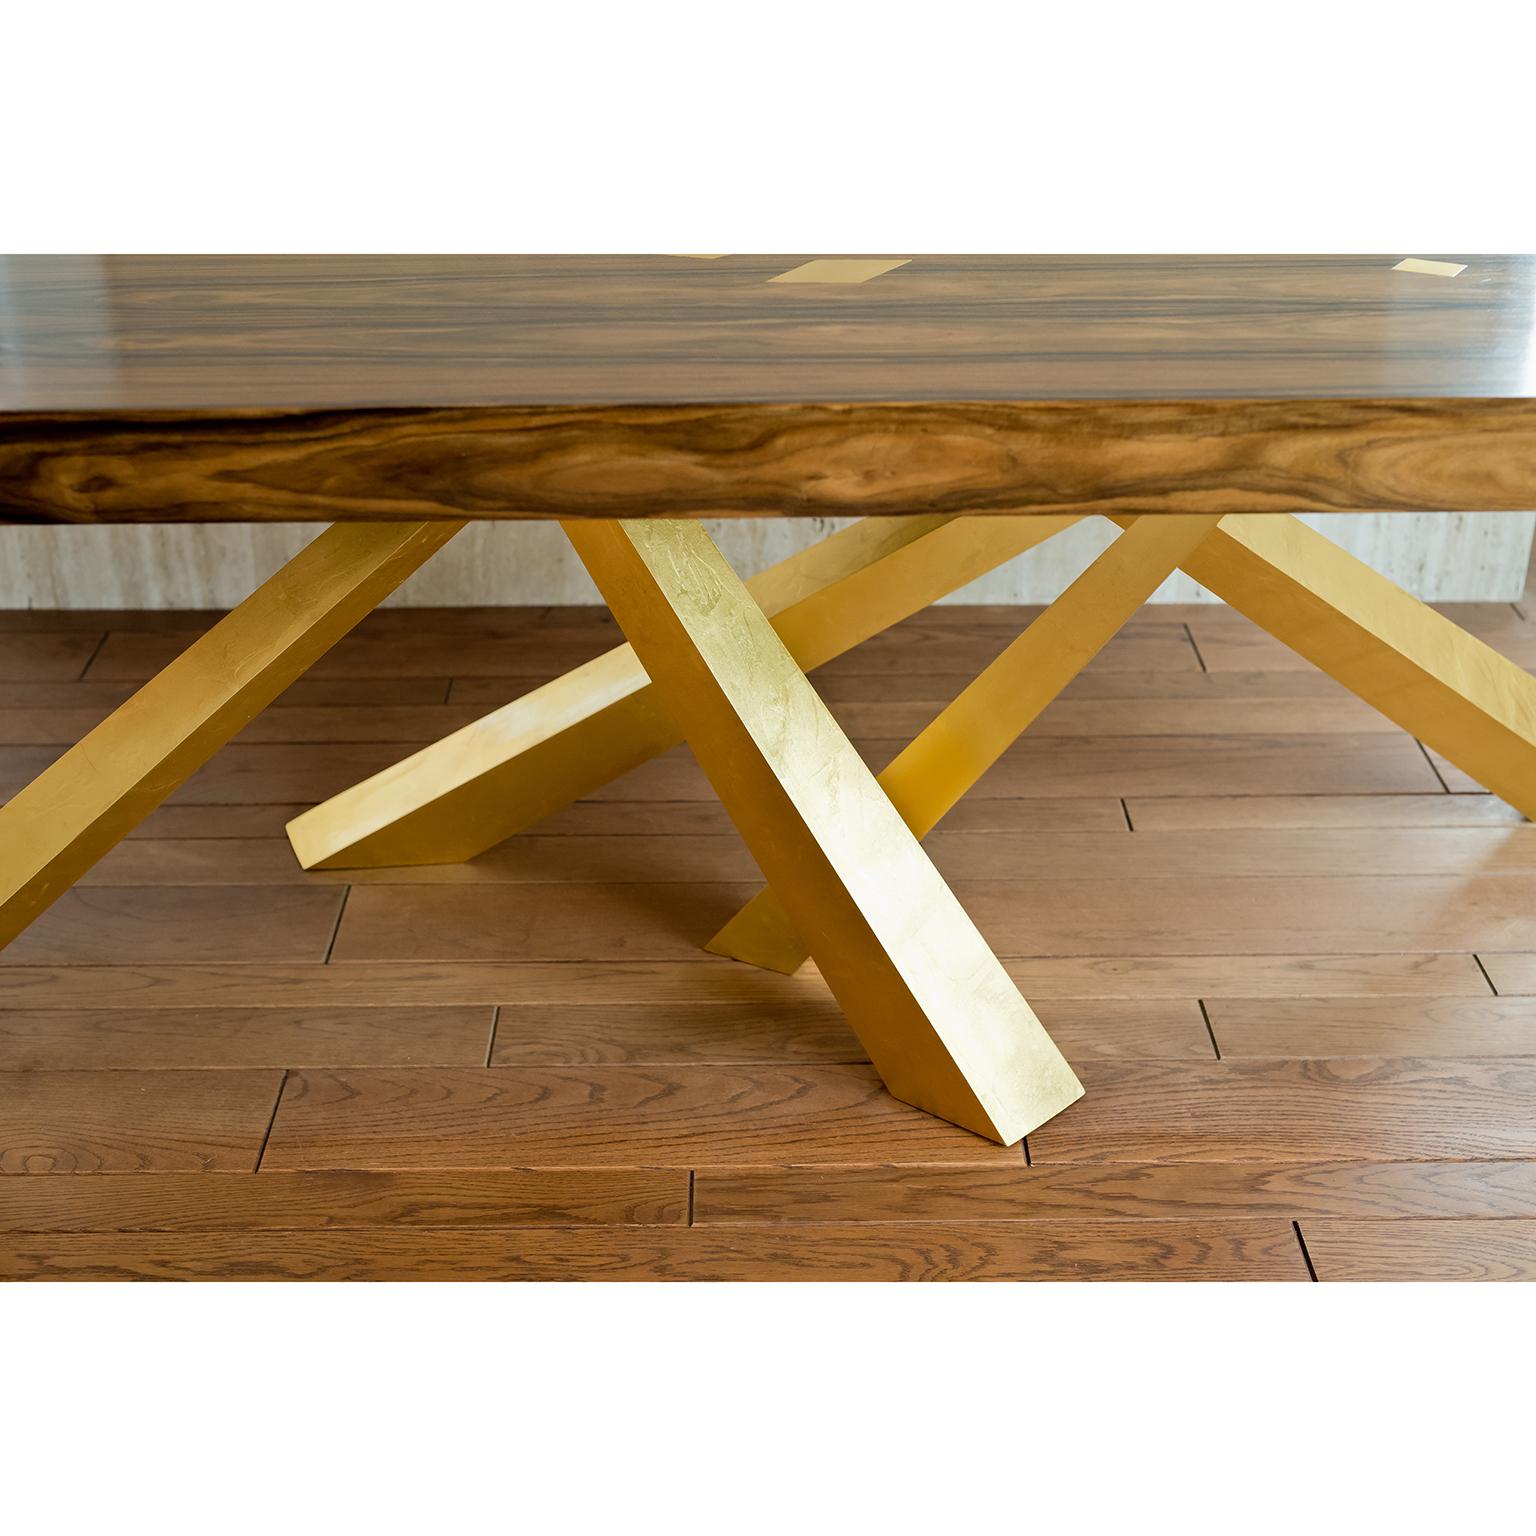 This beautiful table plays with the idea of balance and harmony while at the same time embracing a sense tension. The legs are precisely engineered to be perfectly stable even though it feels almost as if they just happened to fall that way.